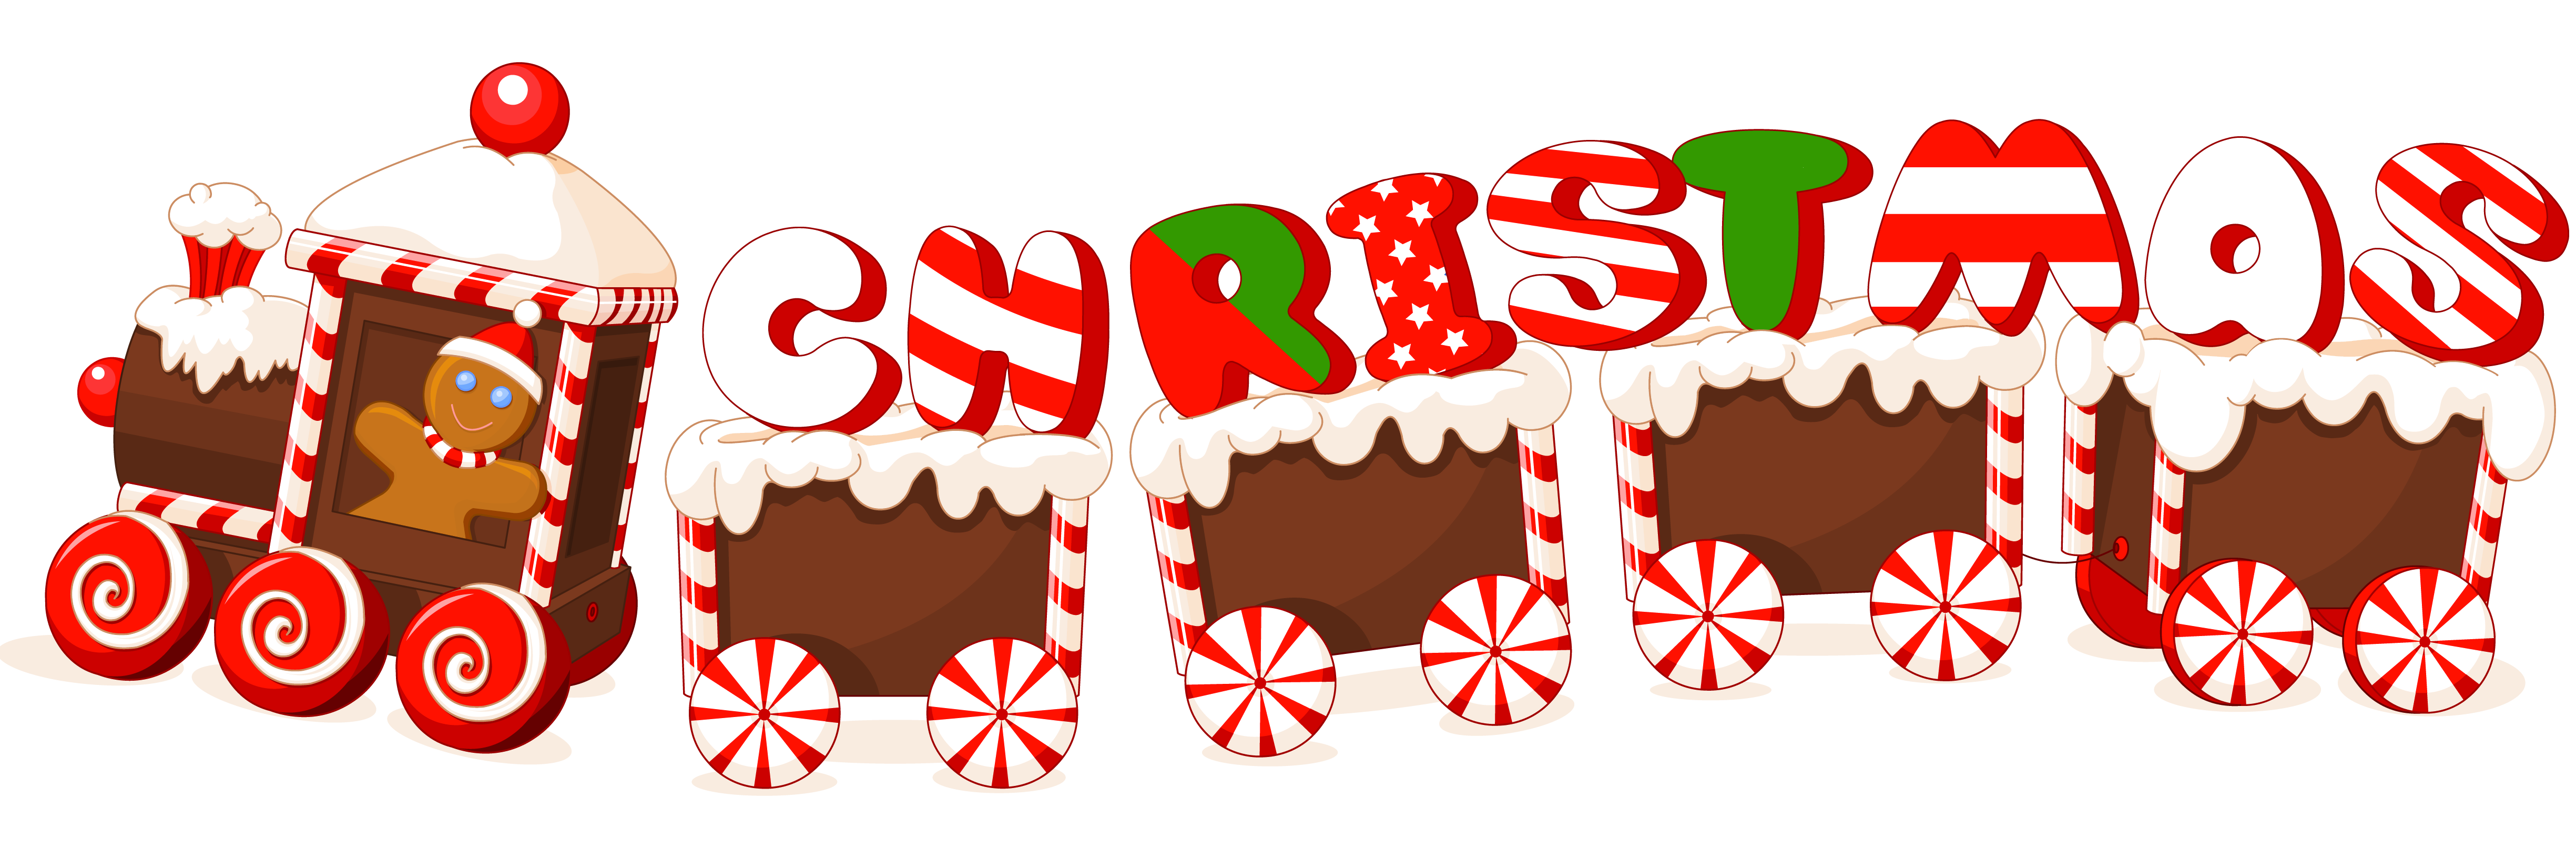 free clipart merry christmas text - photo #21